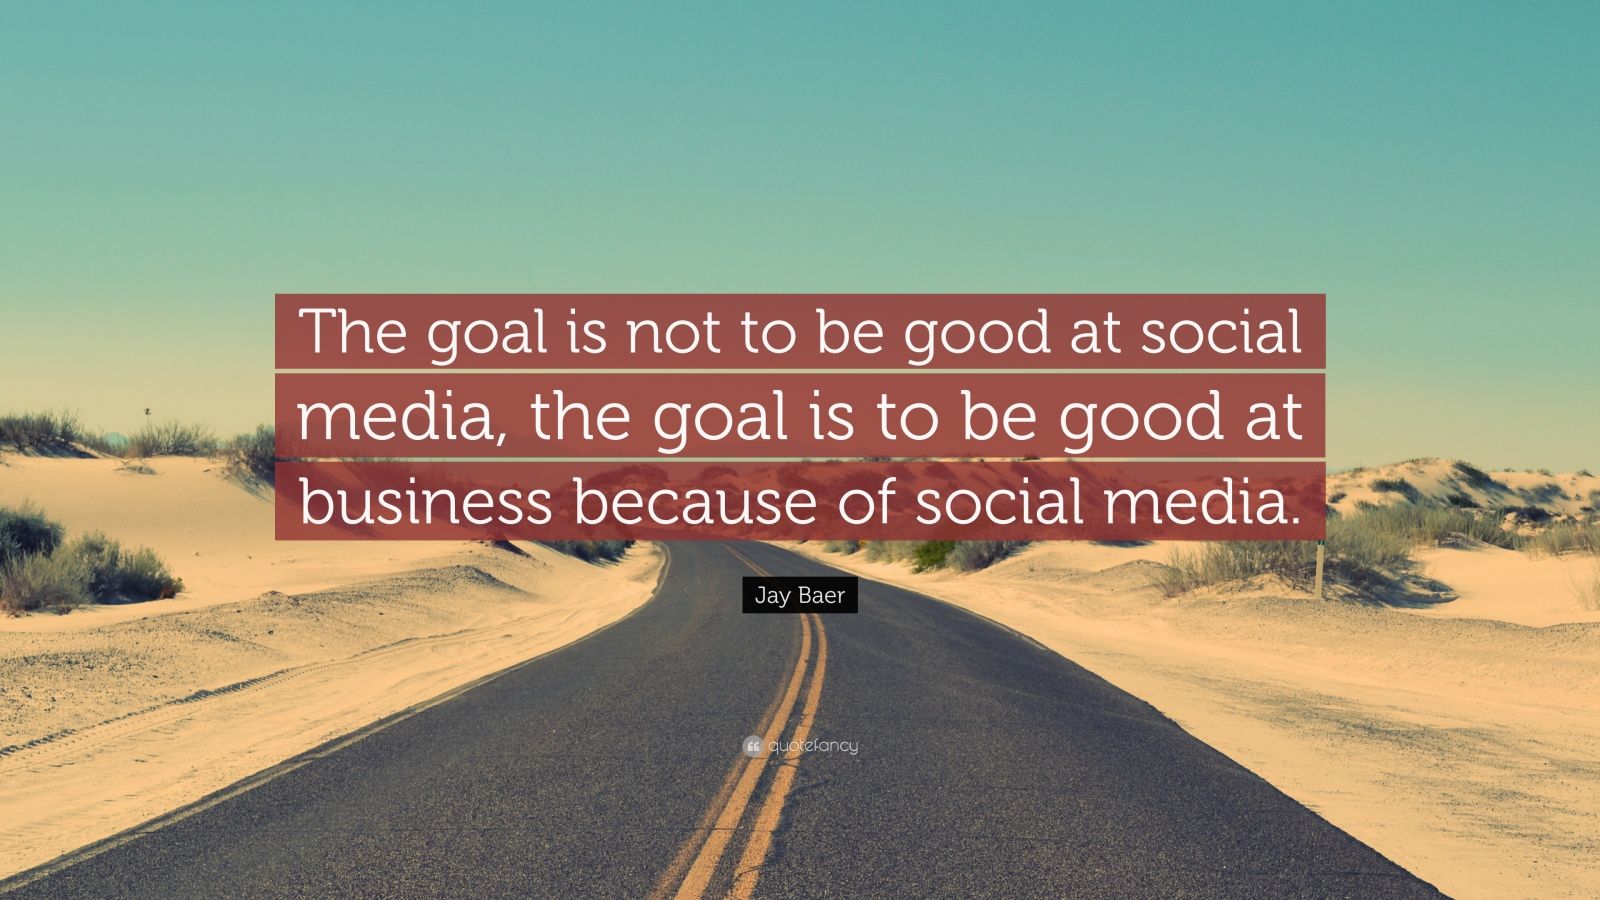 Jay Baer Quote: “The goal is not to be good at social media, the goal